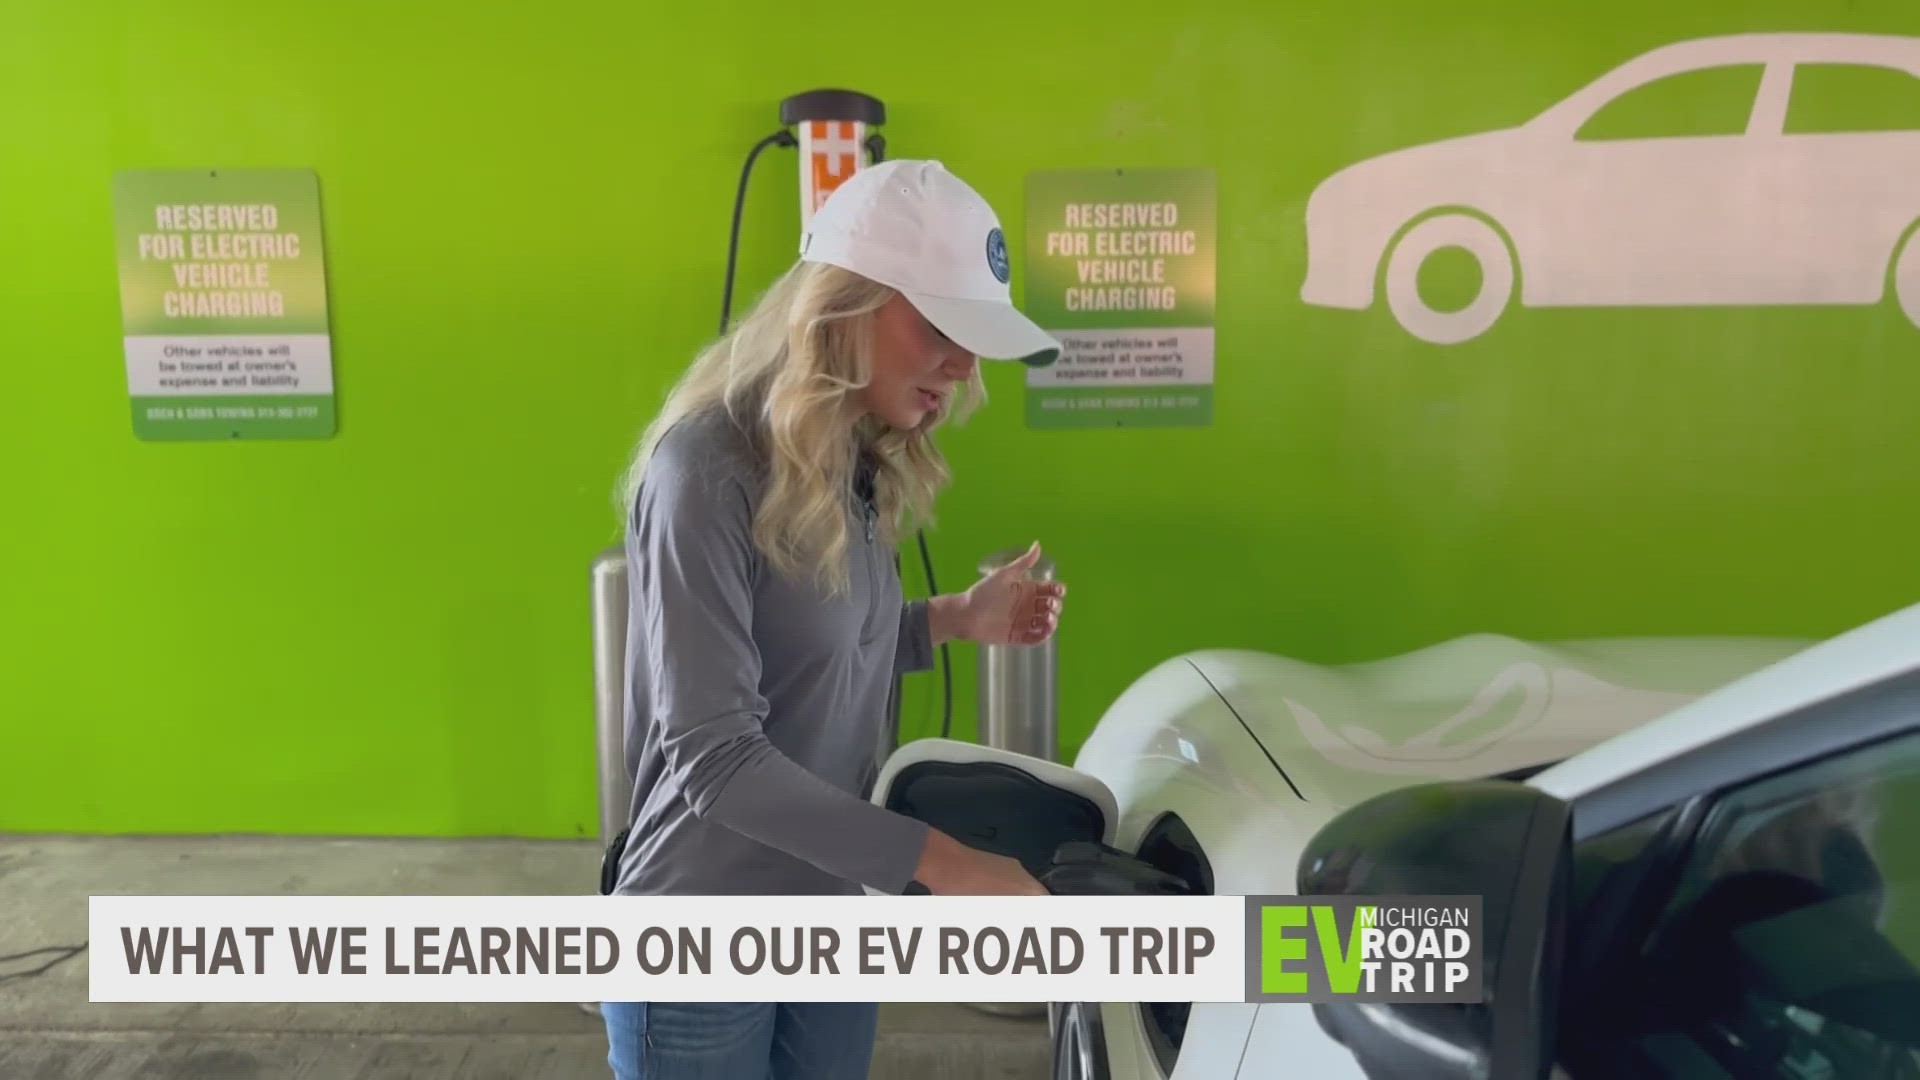 Samantha Jacques is sharing what she learned about EV charging, Michigan's EV infrastructure and more while on her road trip.